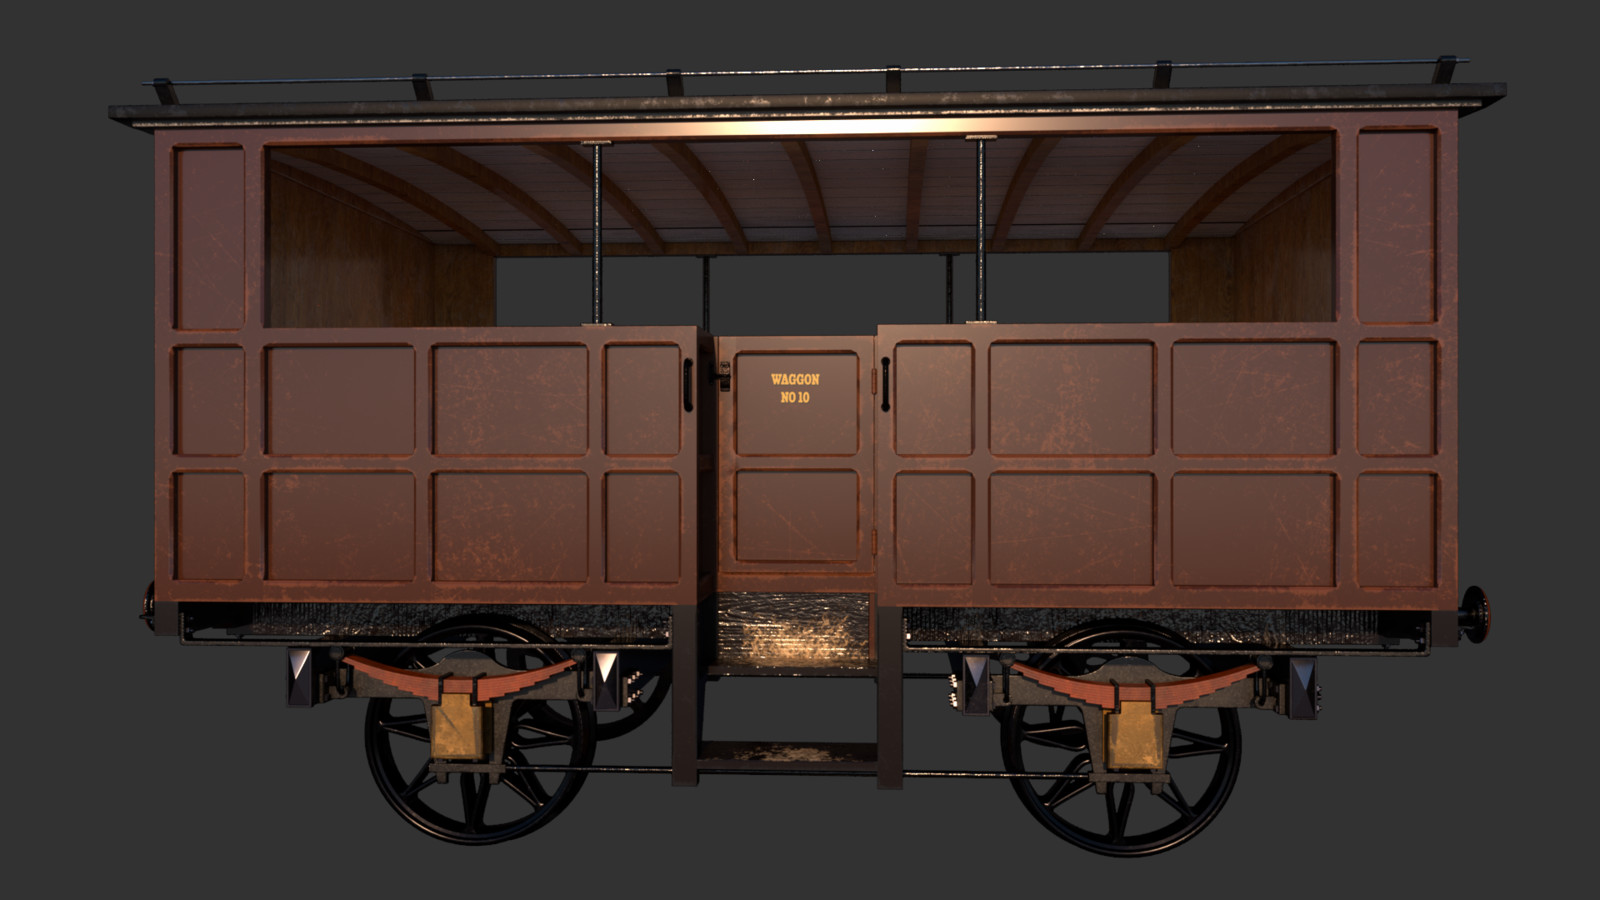 Waggon, color pass. This would be 3rd class. Nothing to protect you from the elements.